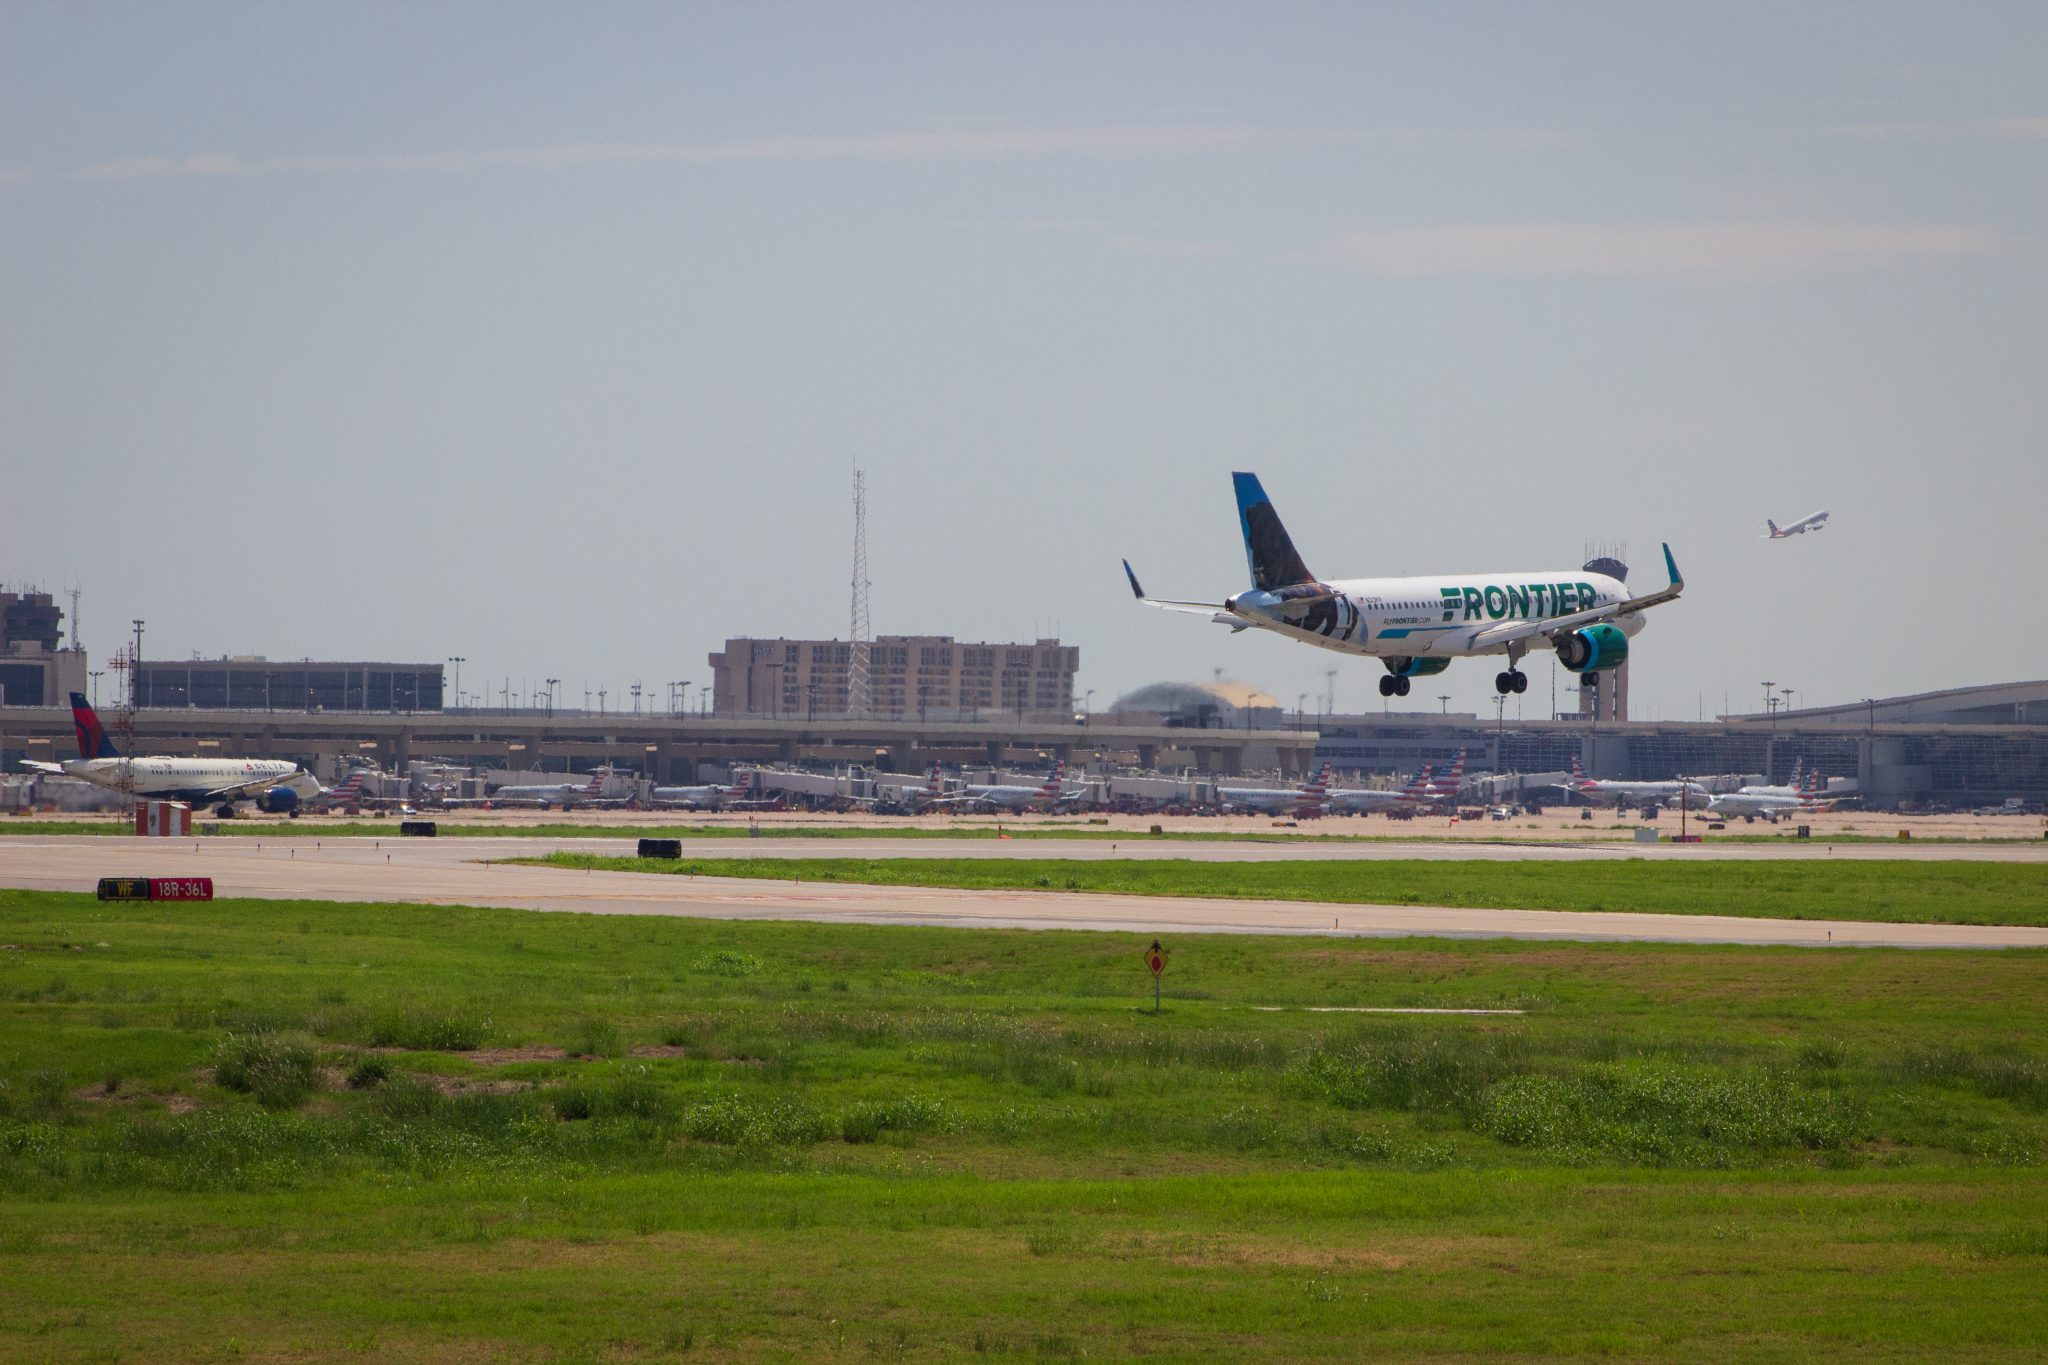 A Frontier Airlines plane lands while a Delta Airlines plane takes off